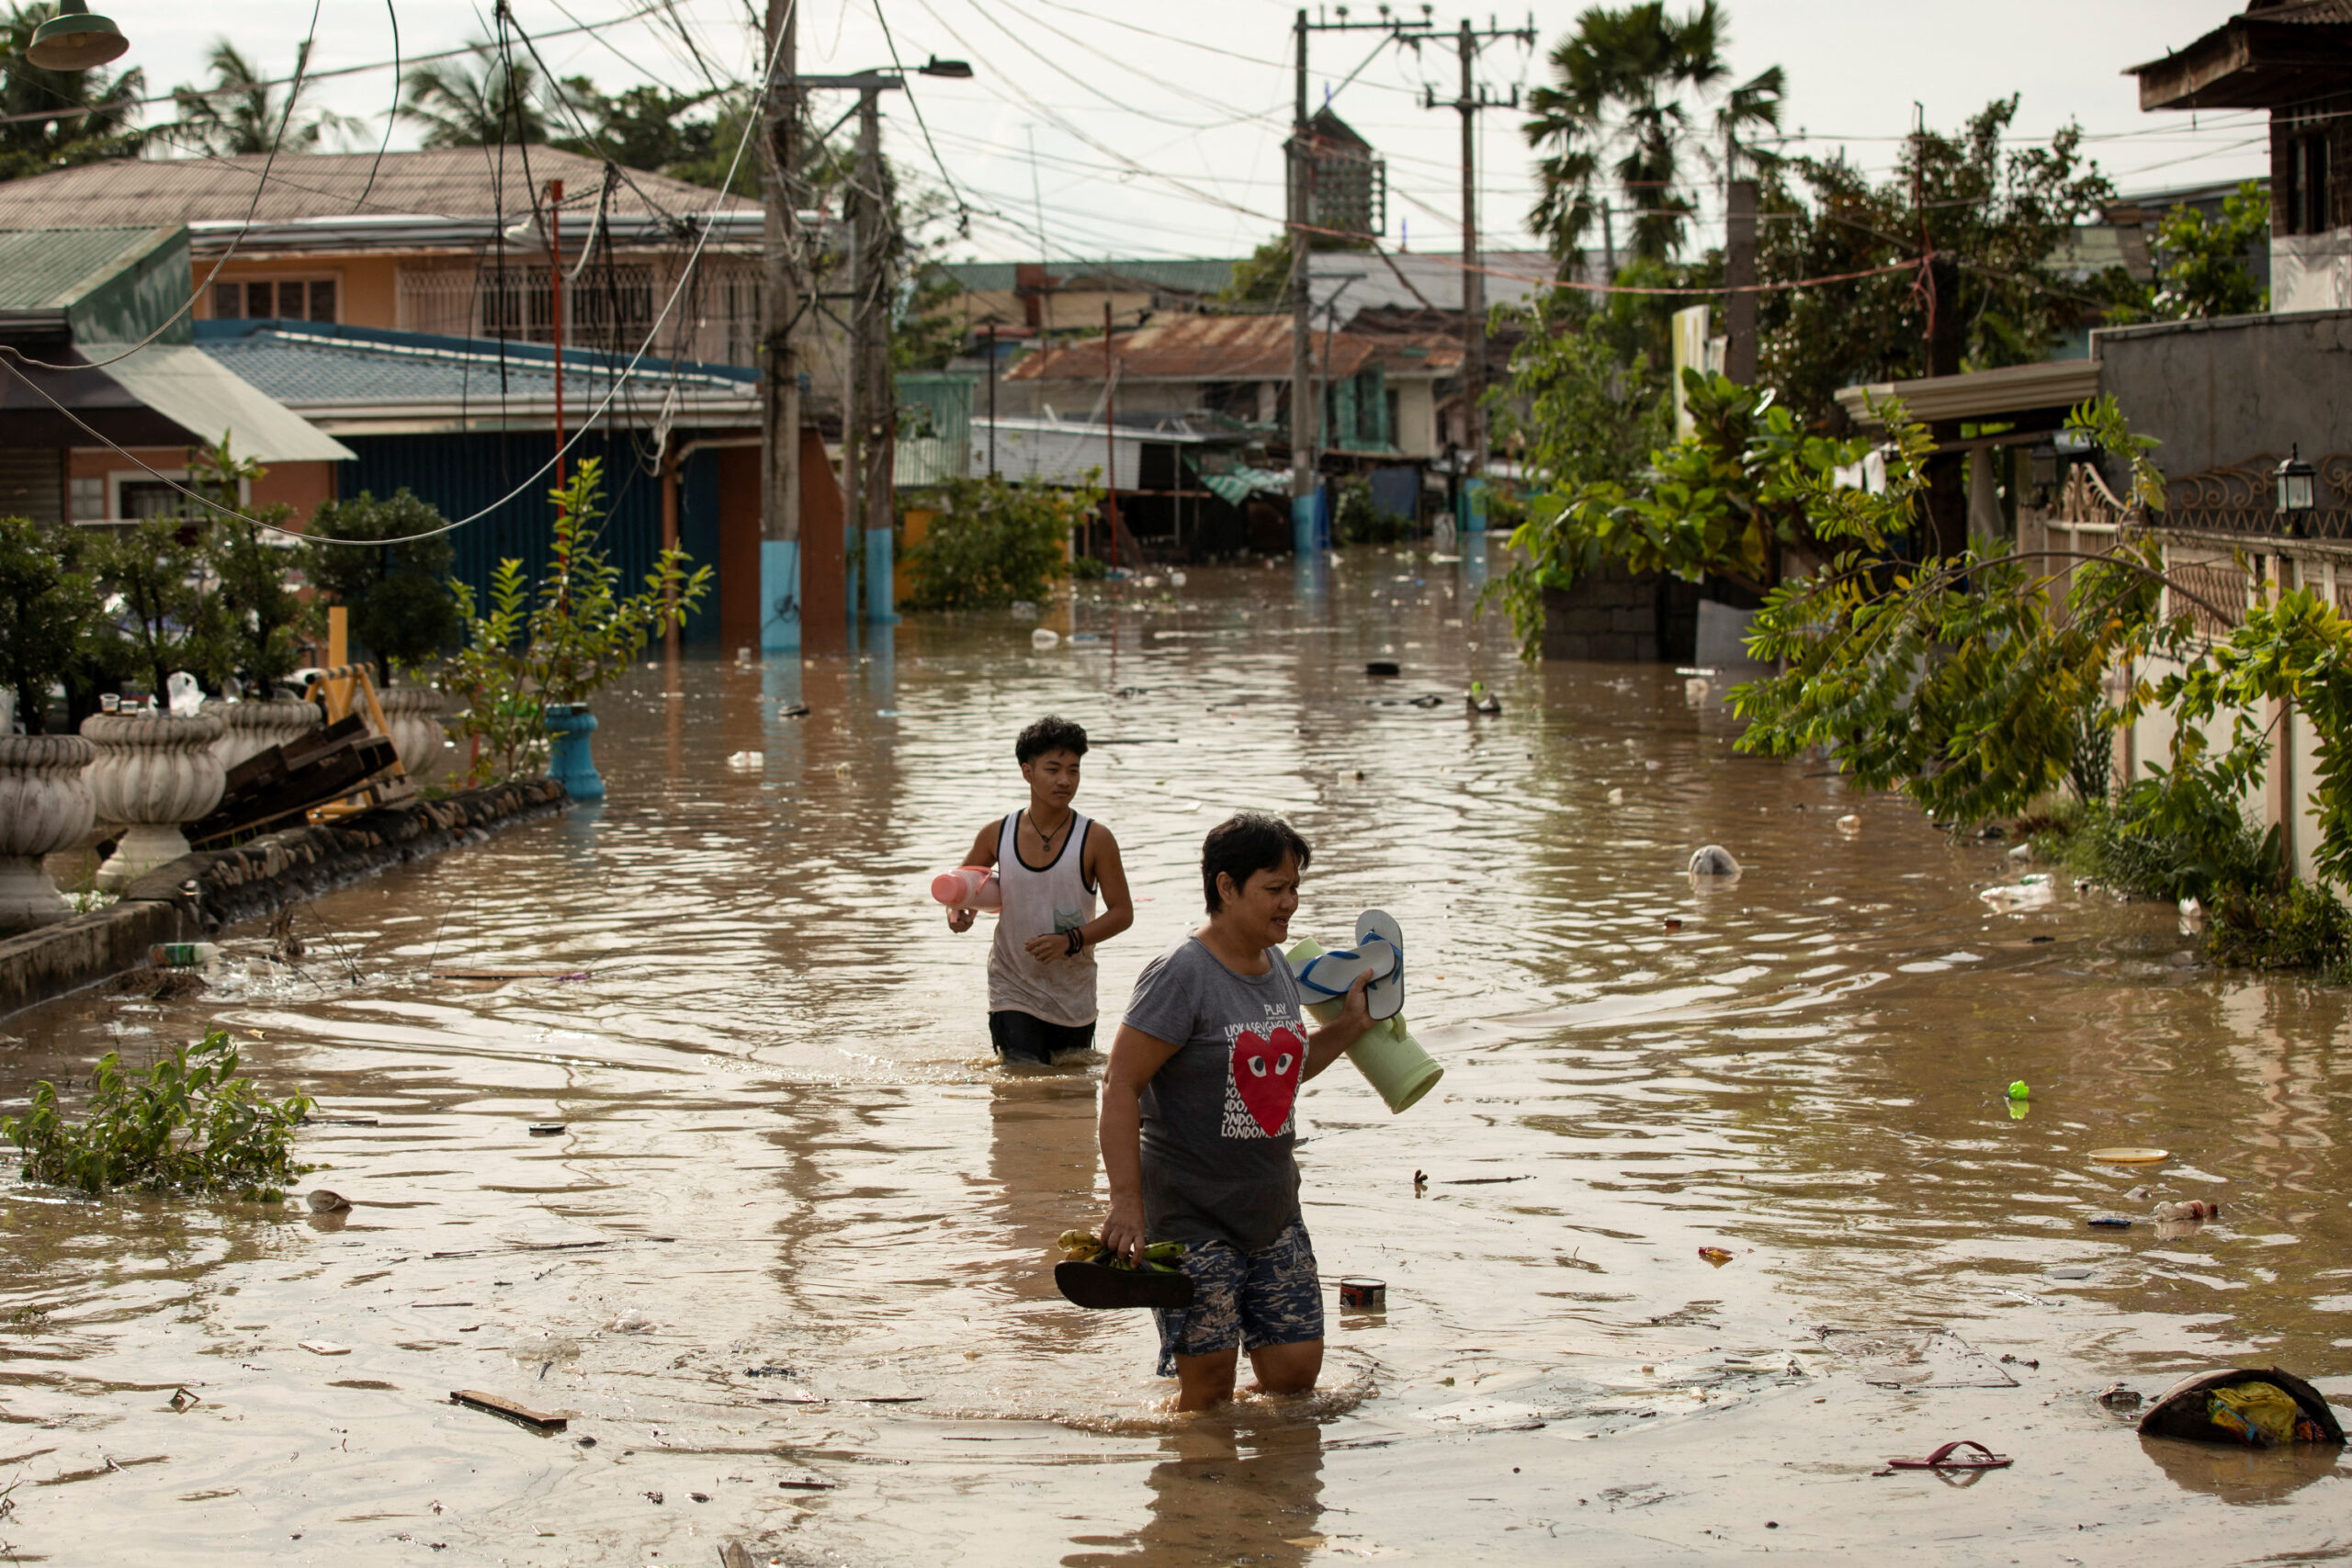 46,000 People Forced to Move Out Due to Flood in Philippines